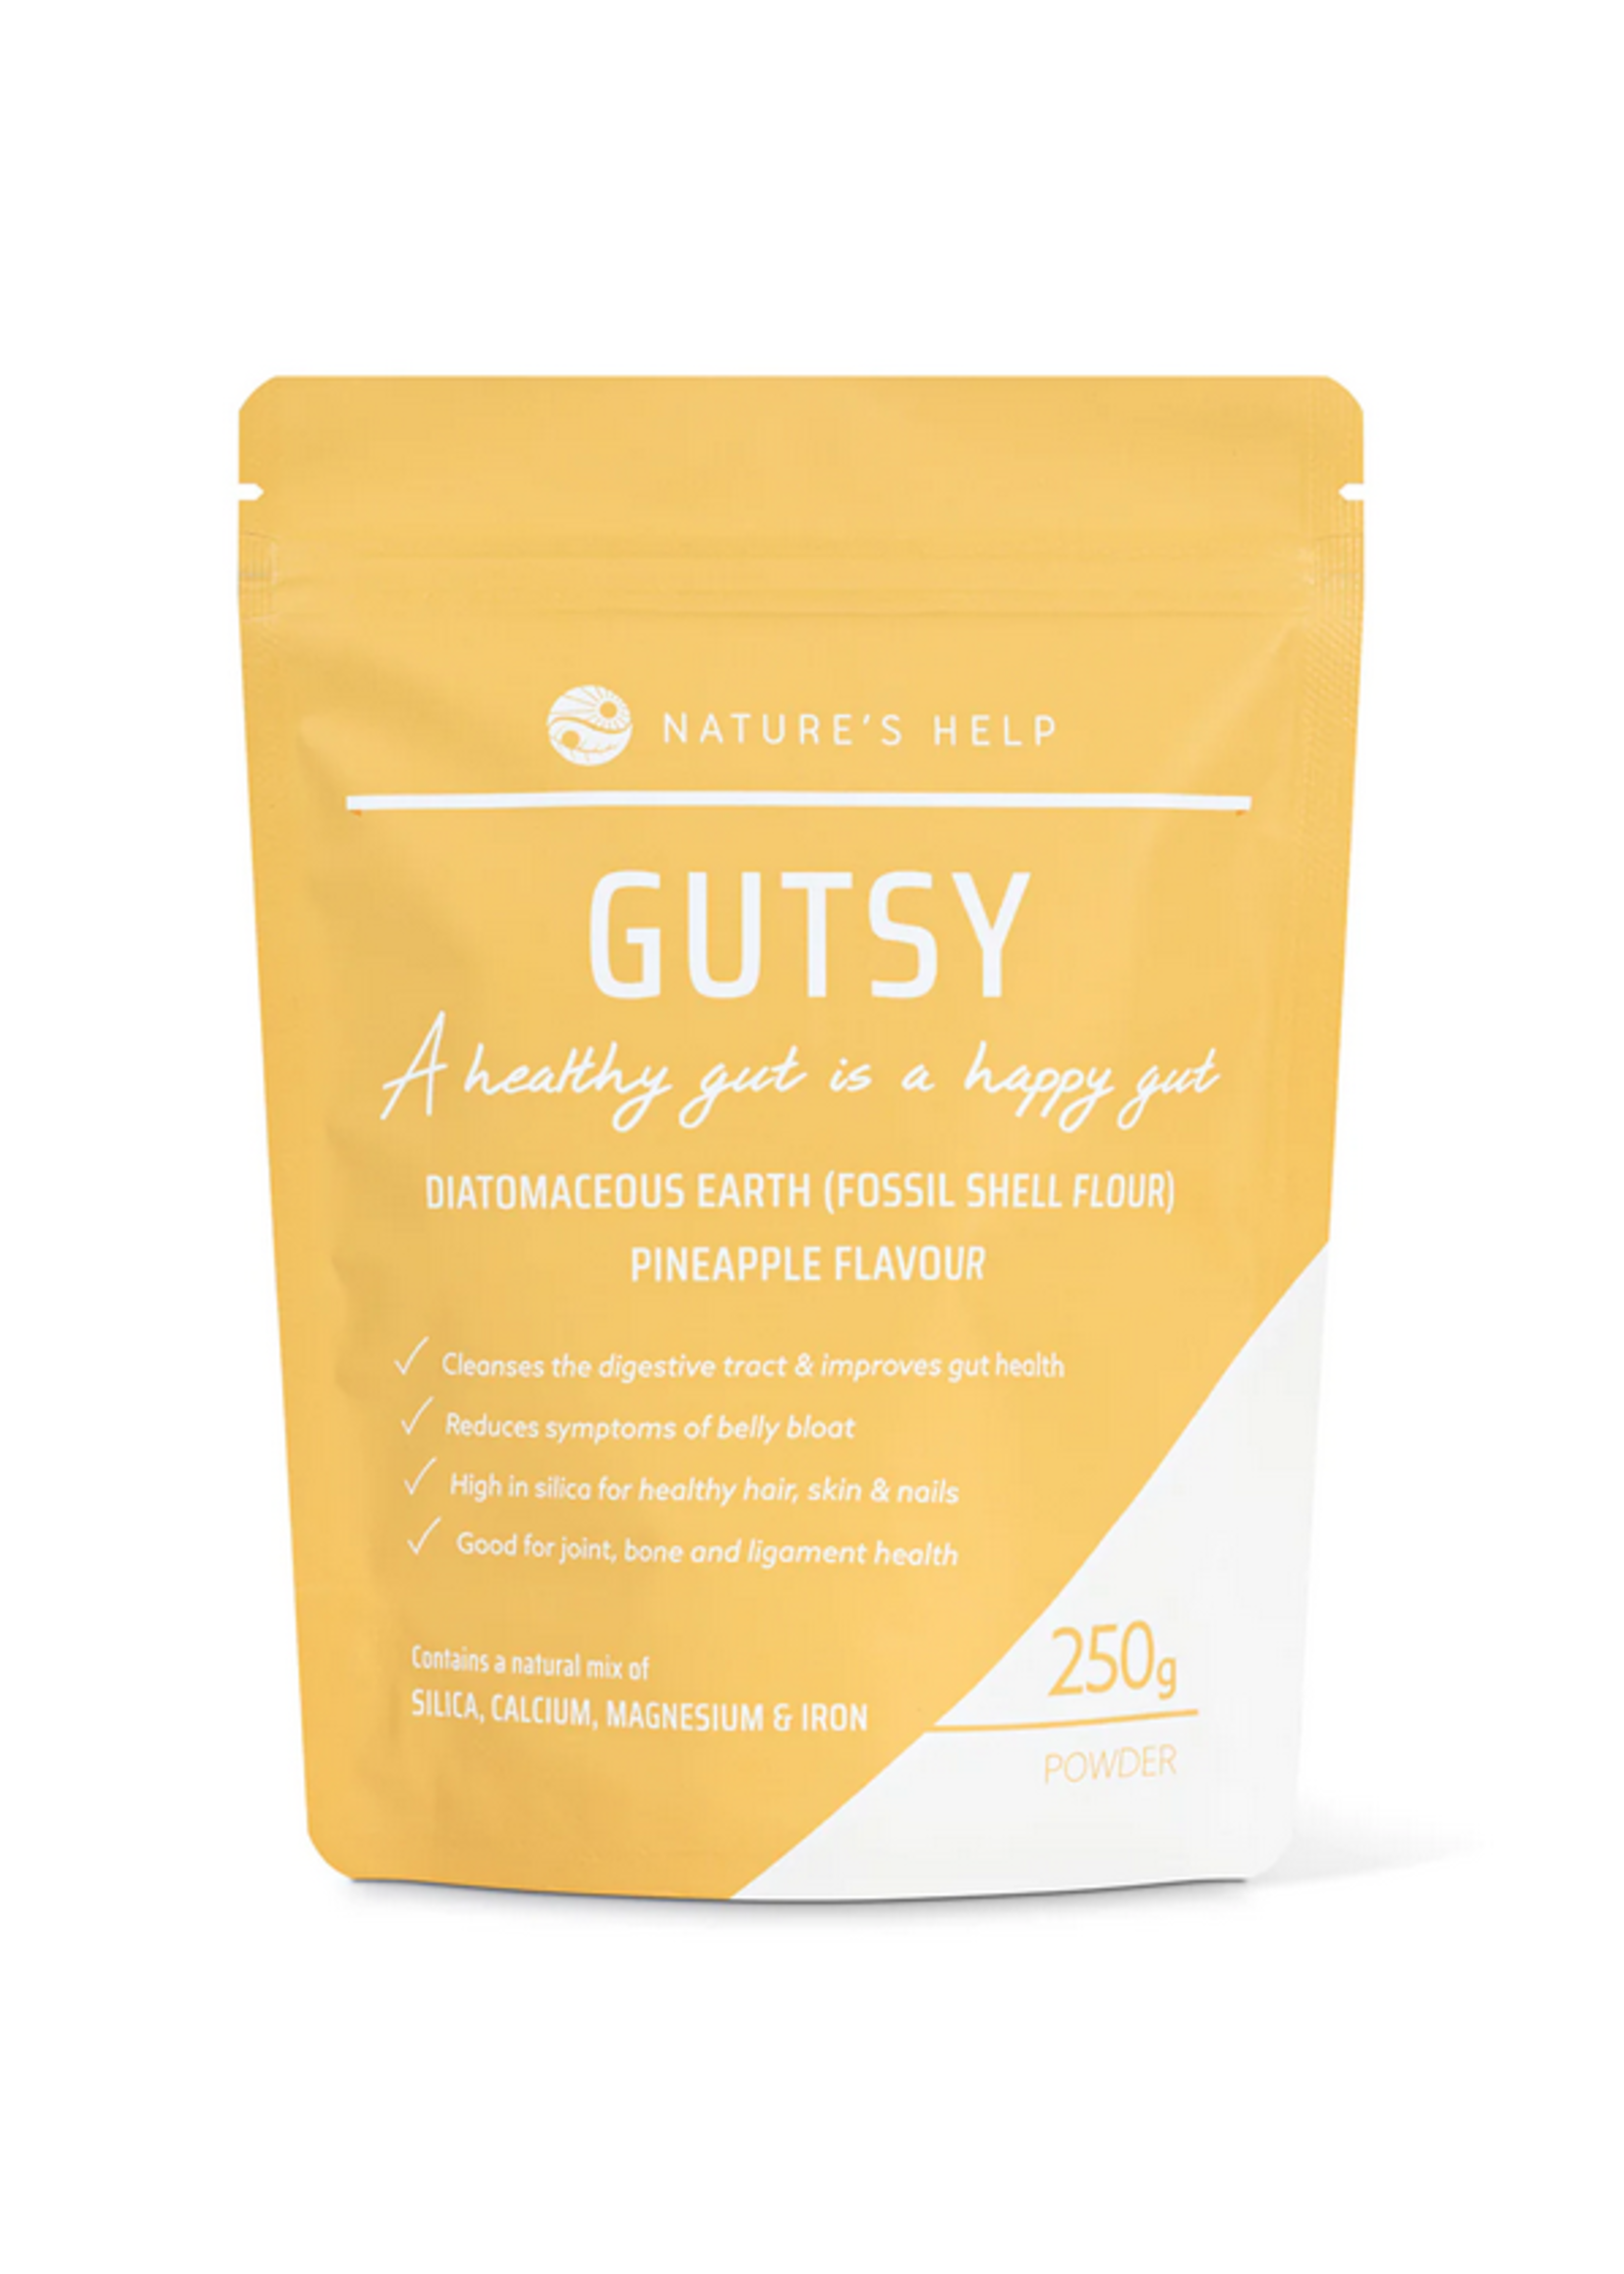 Natures Help Natures Help Gutsy 250g Pineapple flavour